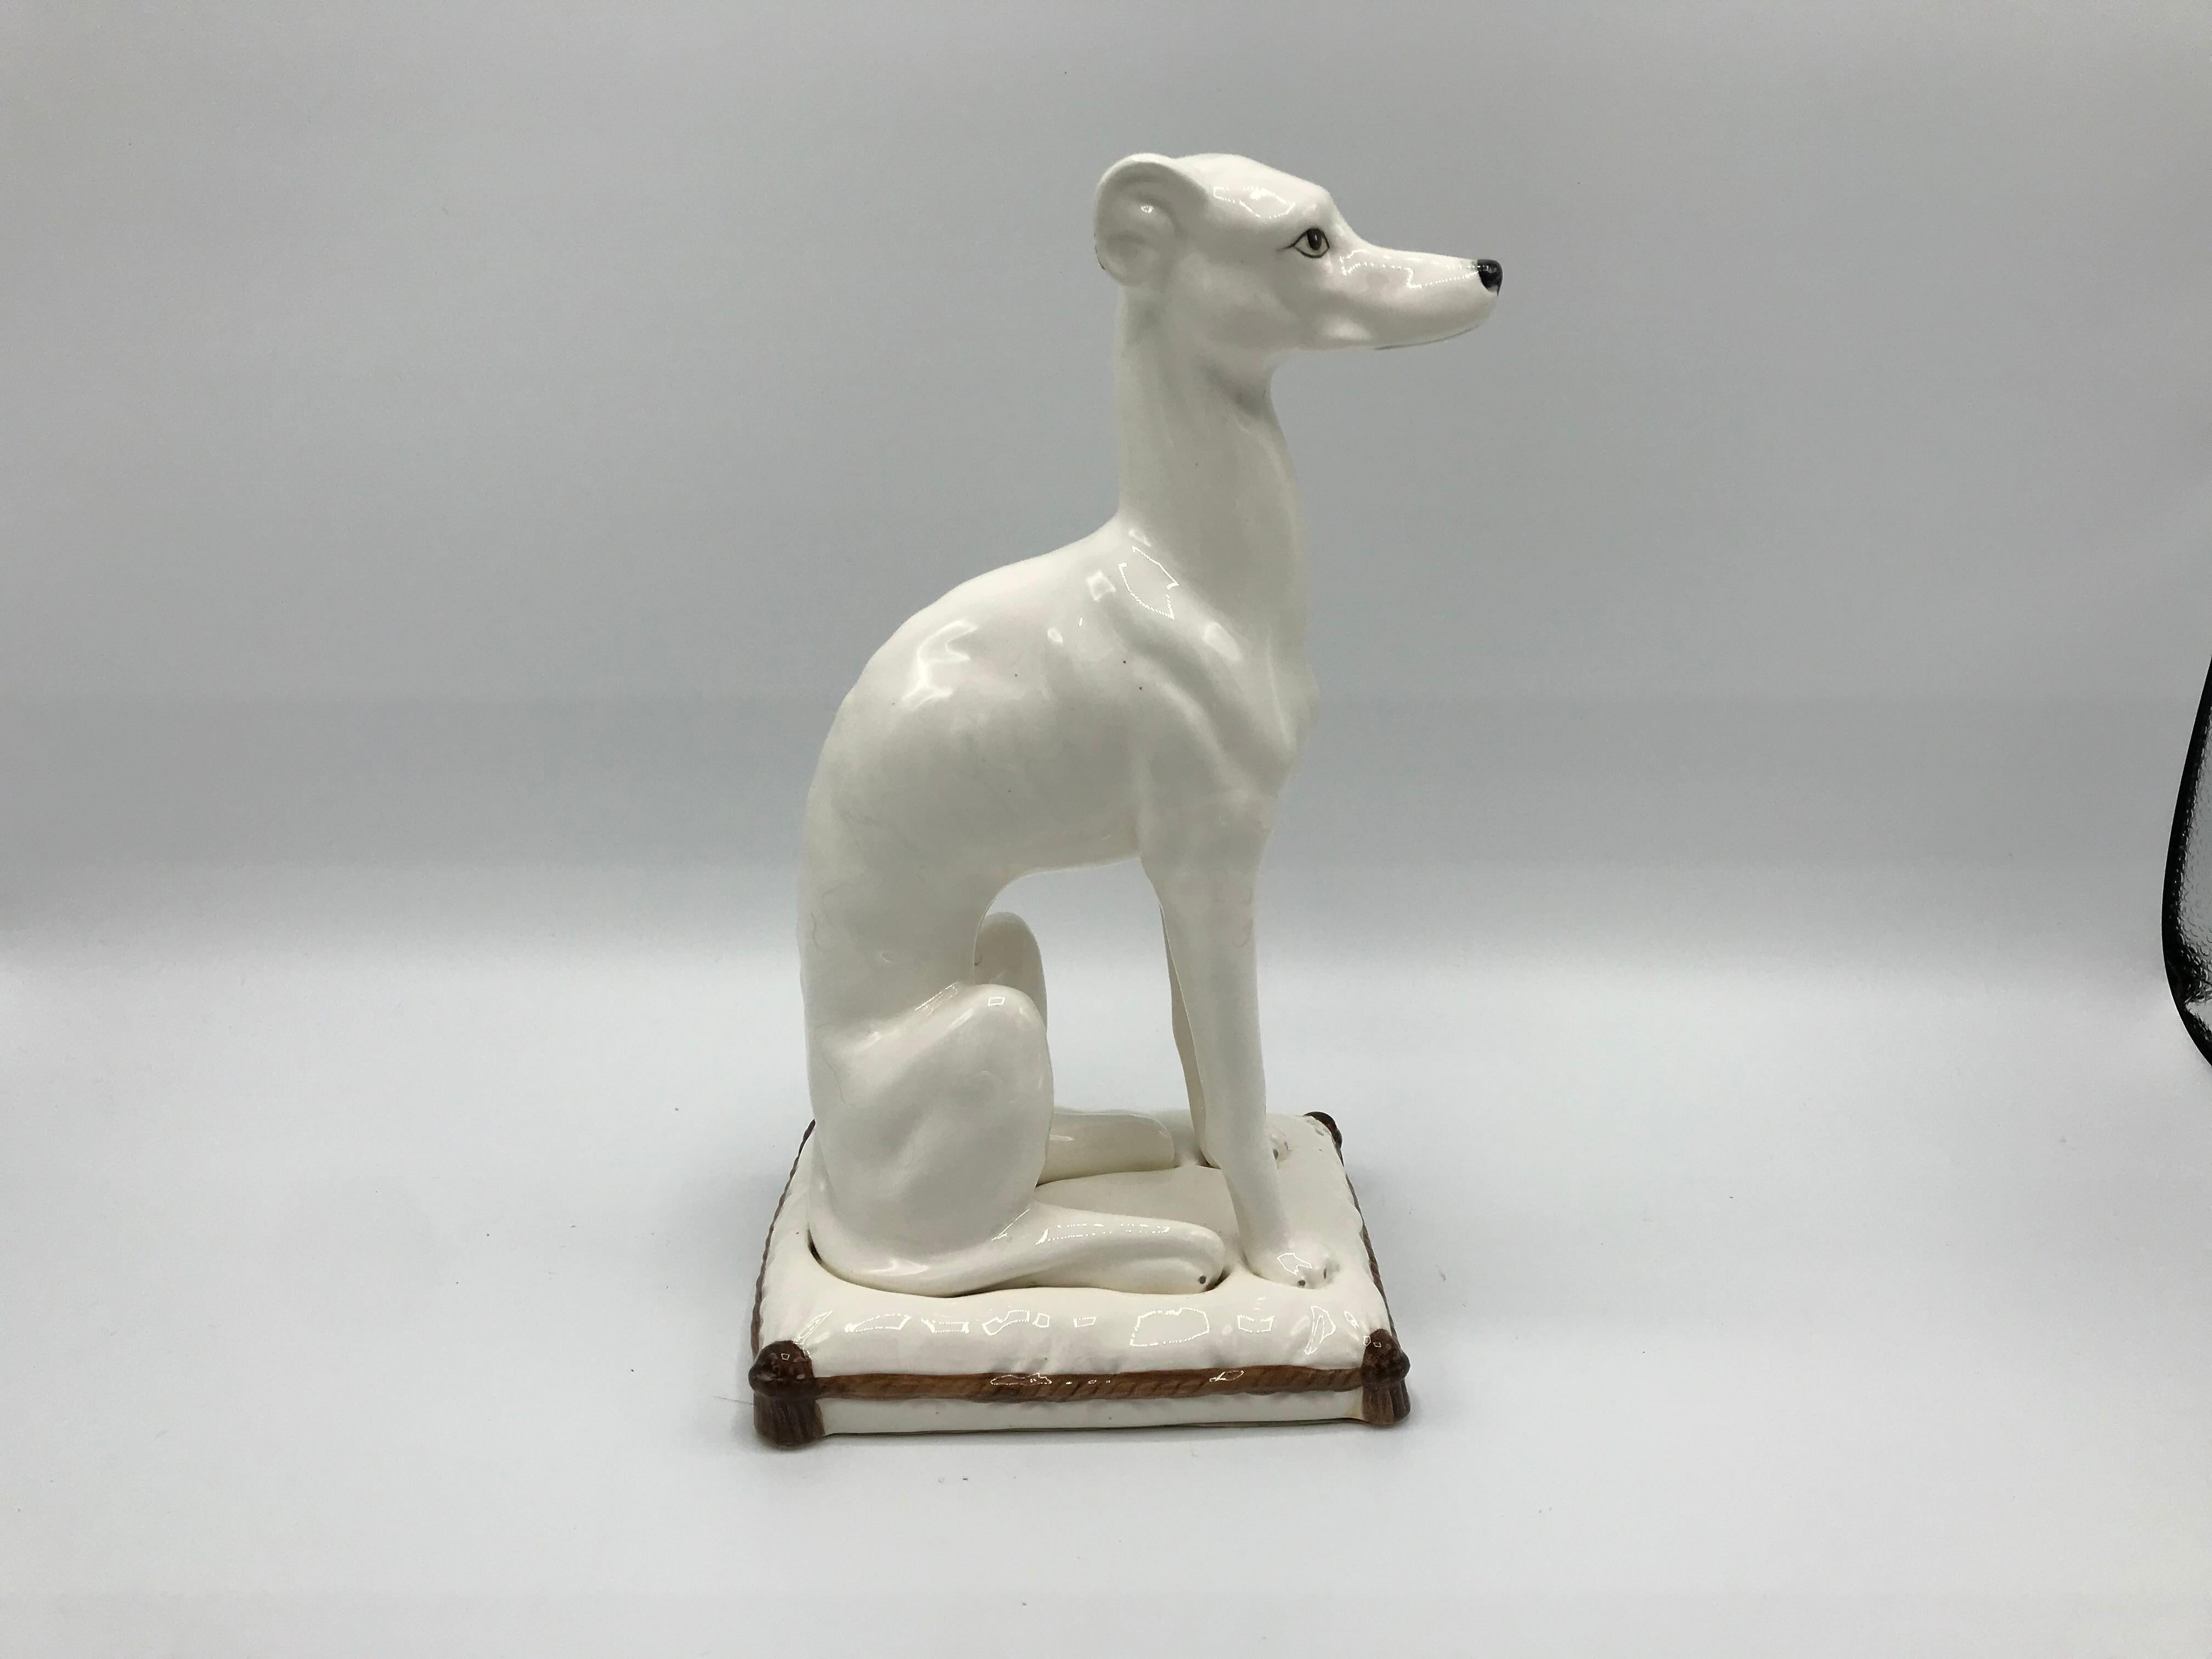 Offered is a gorgeous, 1960s Italian Greyhound ceramic sculpture. Weighted.